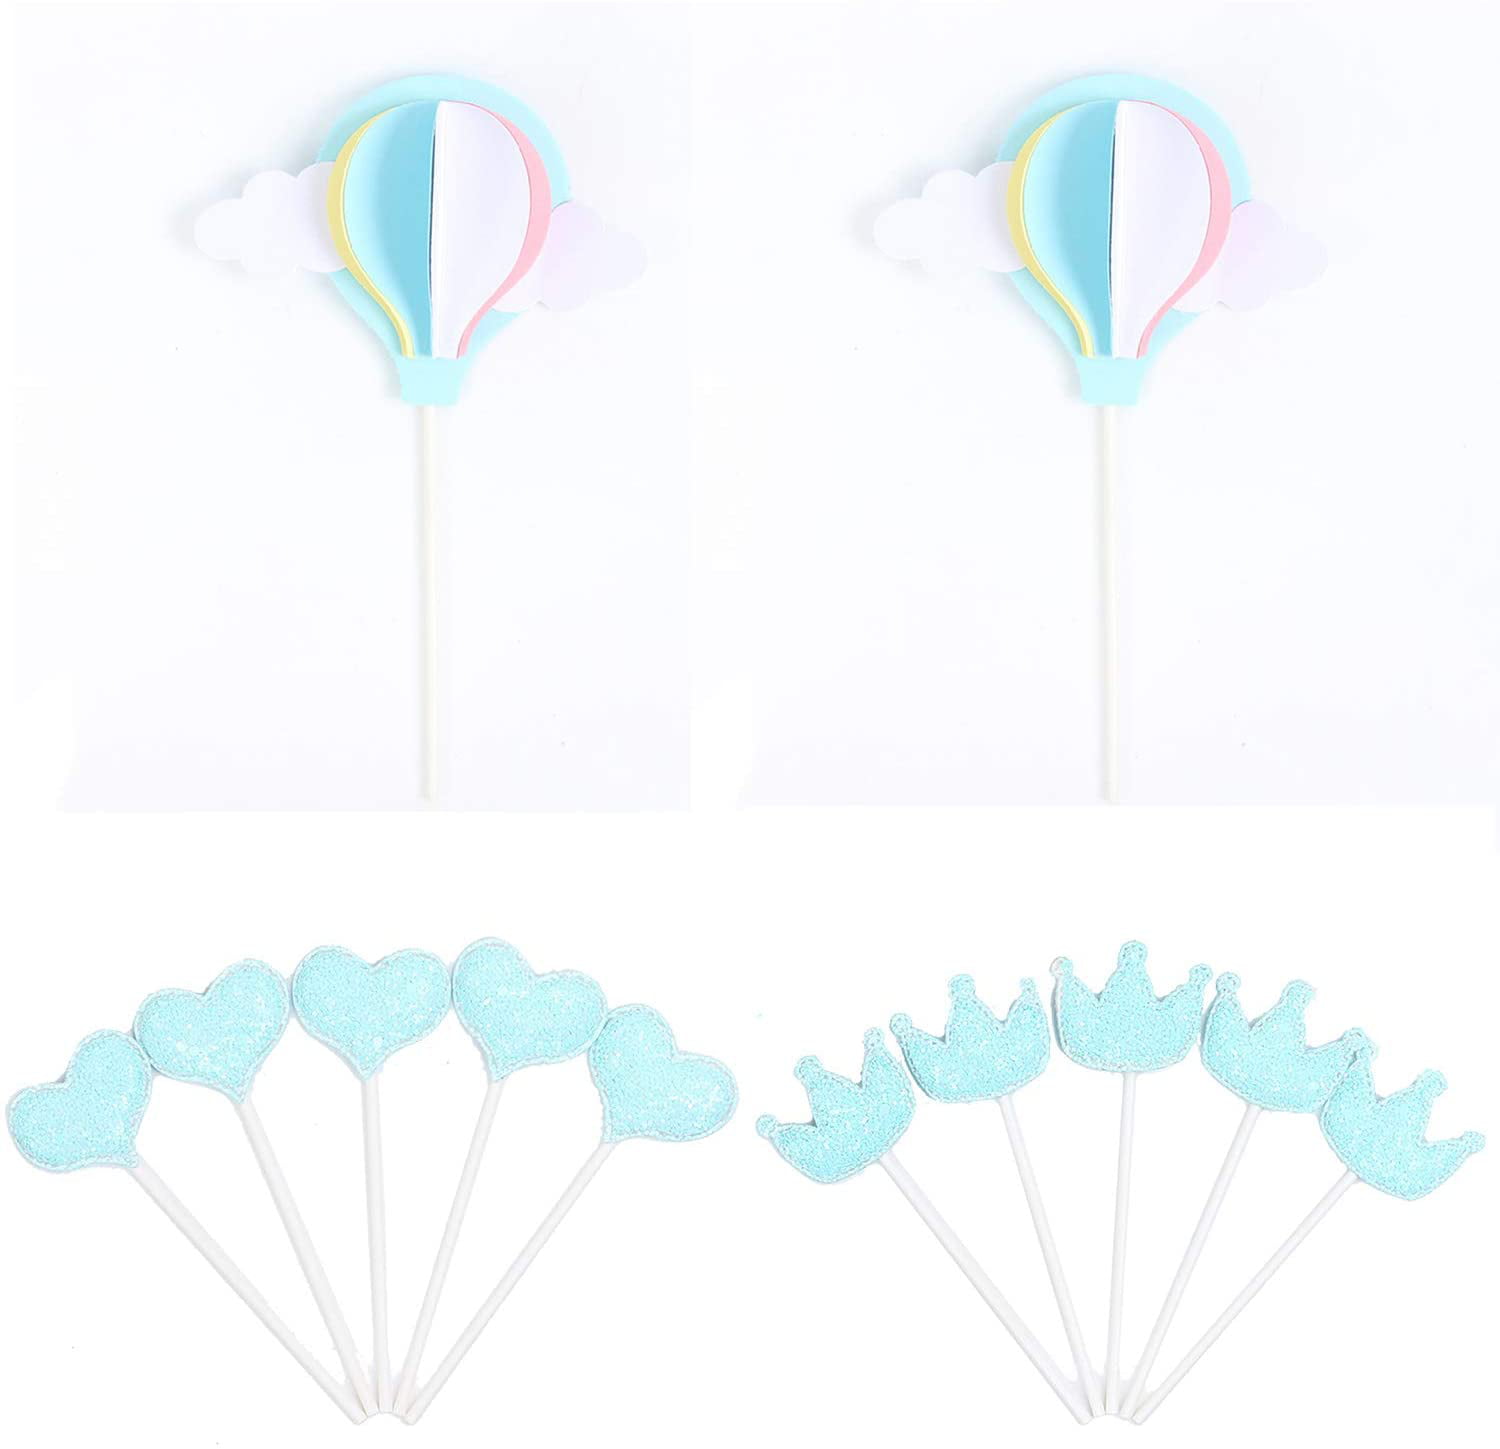 White Cloud Hot Air Balloon Cake Cupcake Toppers For Birthday Wedding Baby Shower Decoration Pack of 20 by GOCROWN 